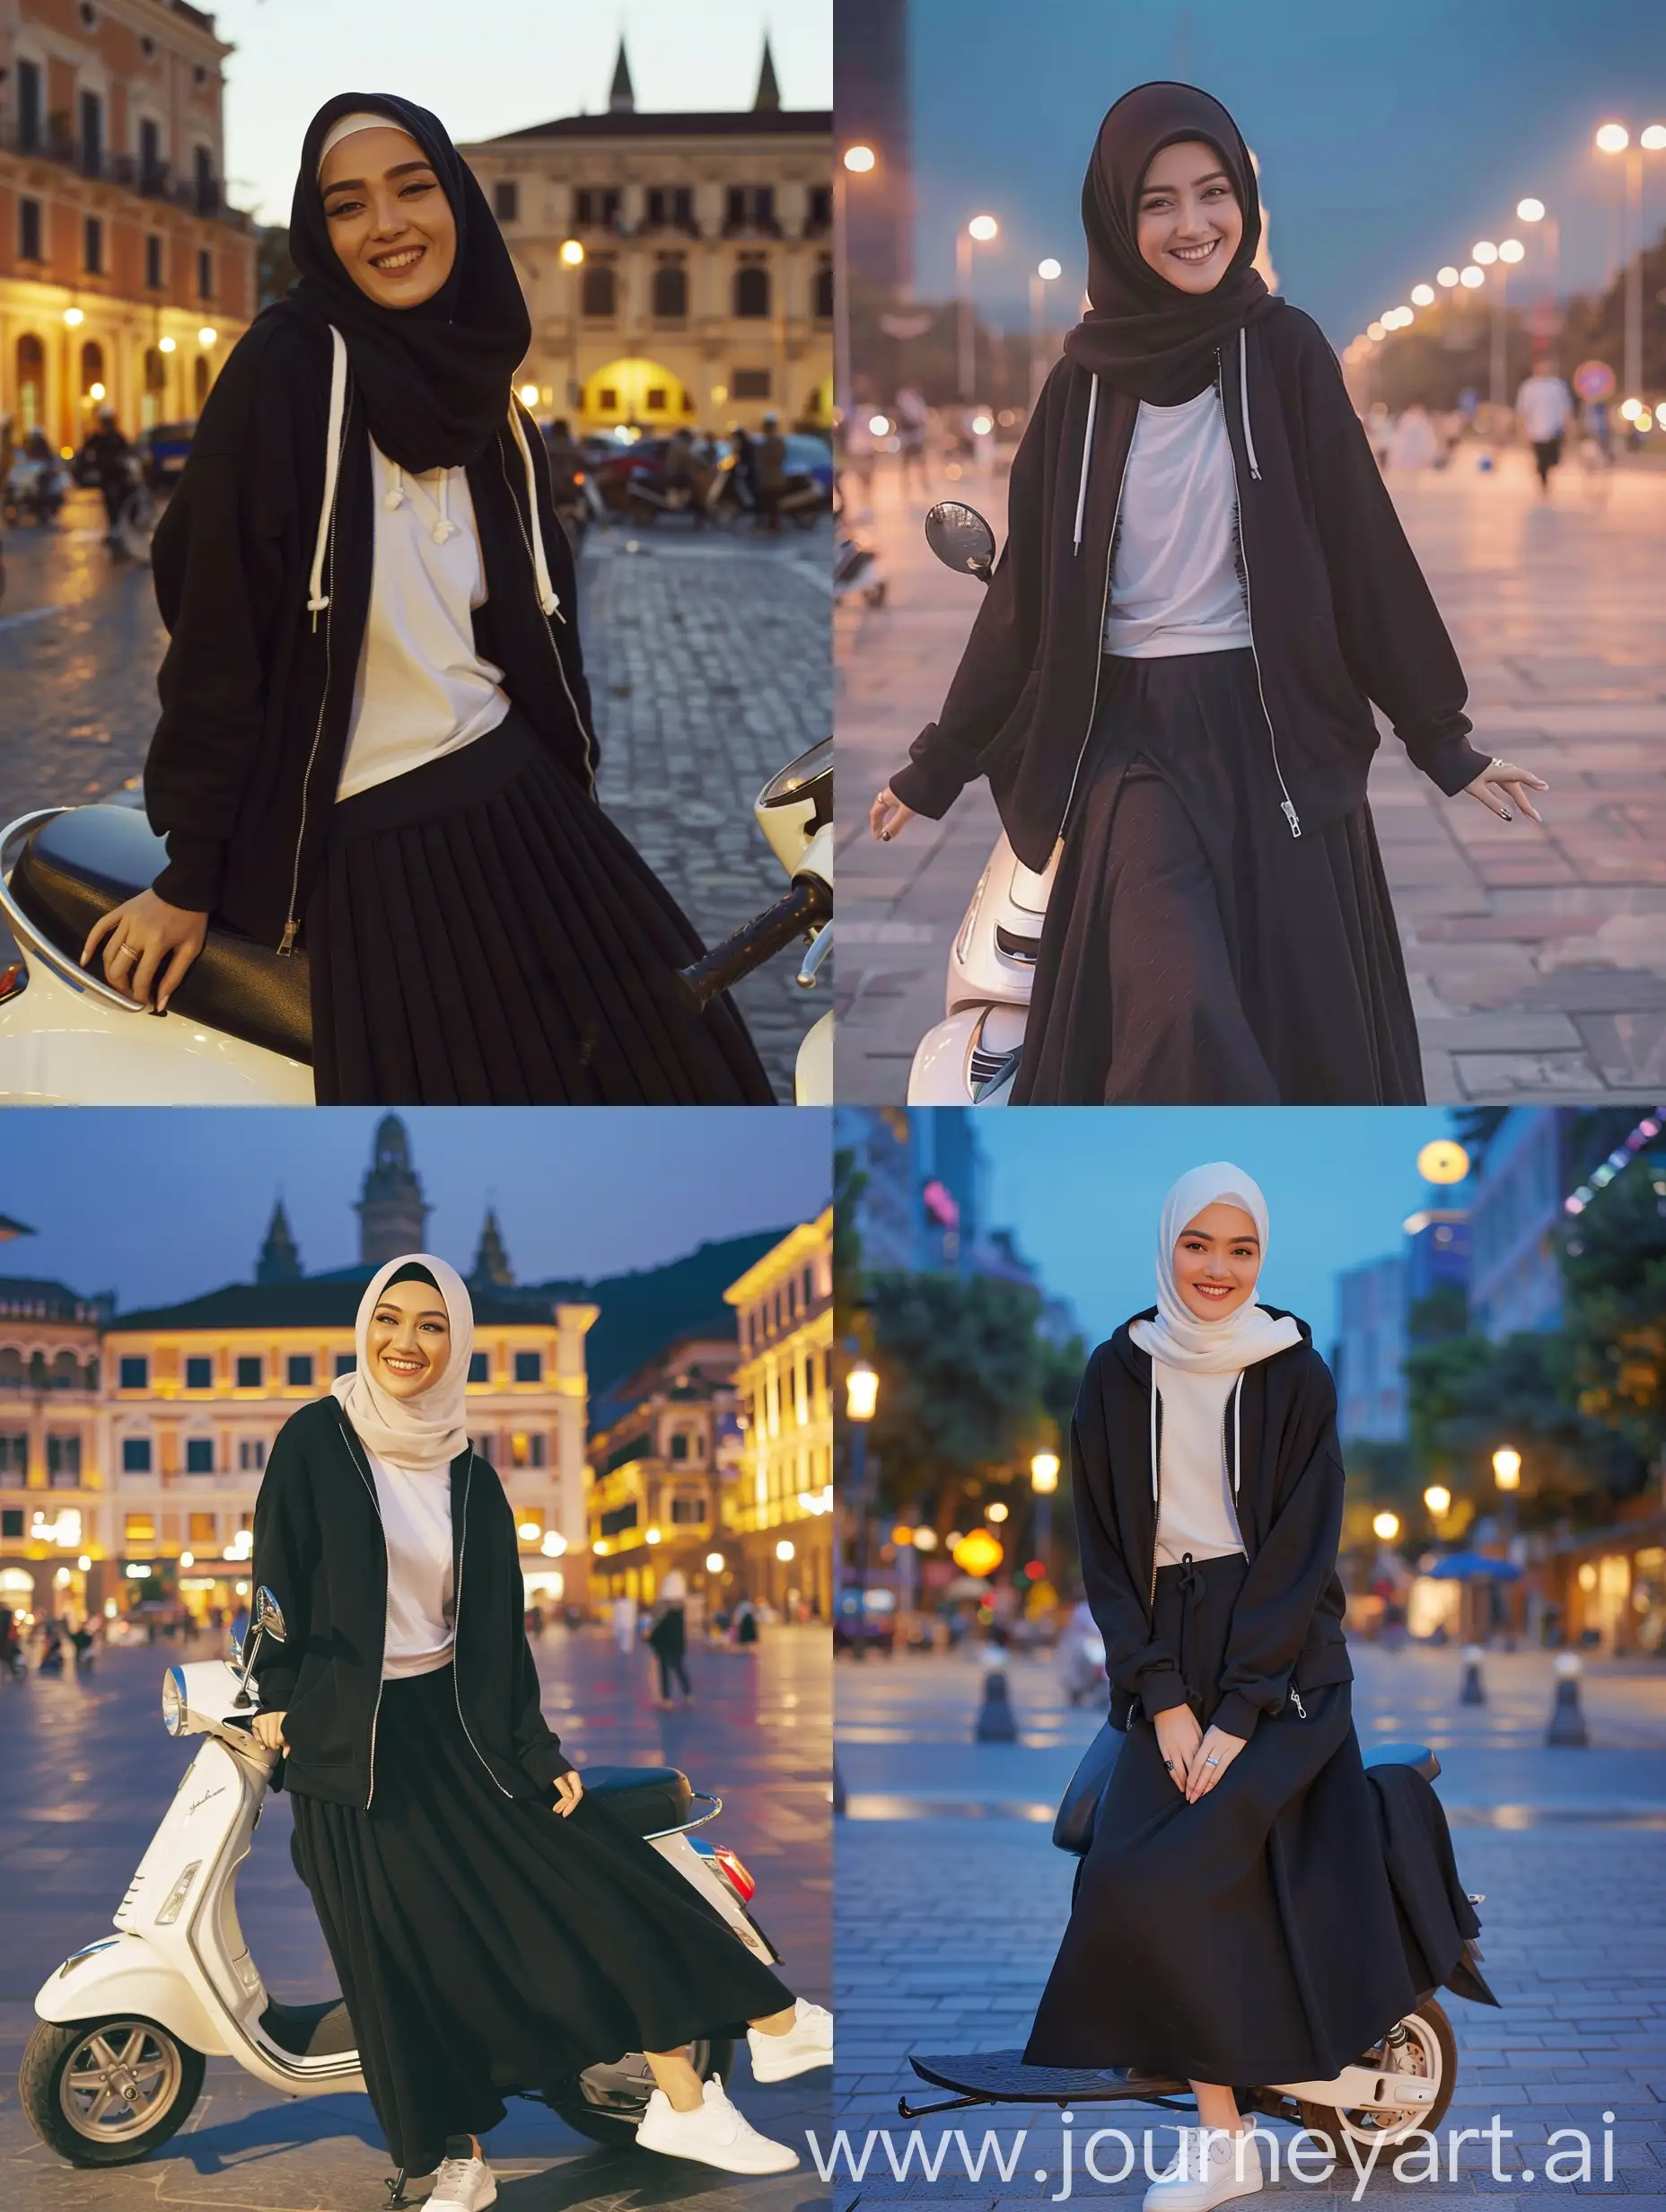 a 25-year-old Indonesian woman, wearing a hijab, a black hoodie with a zipper, wearing a white t-shirt, black long skirt, white shoes, smiling and posing sweetly facing the camera,the background  is middle of the city square, evening atmosphere, sitting on top a scooter.